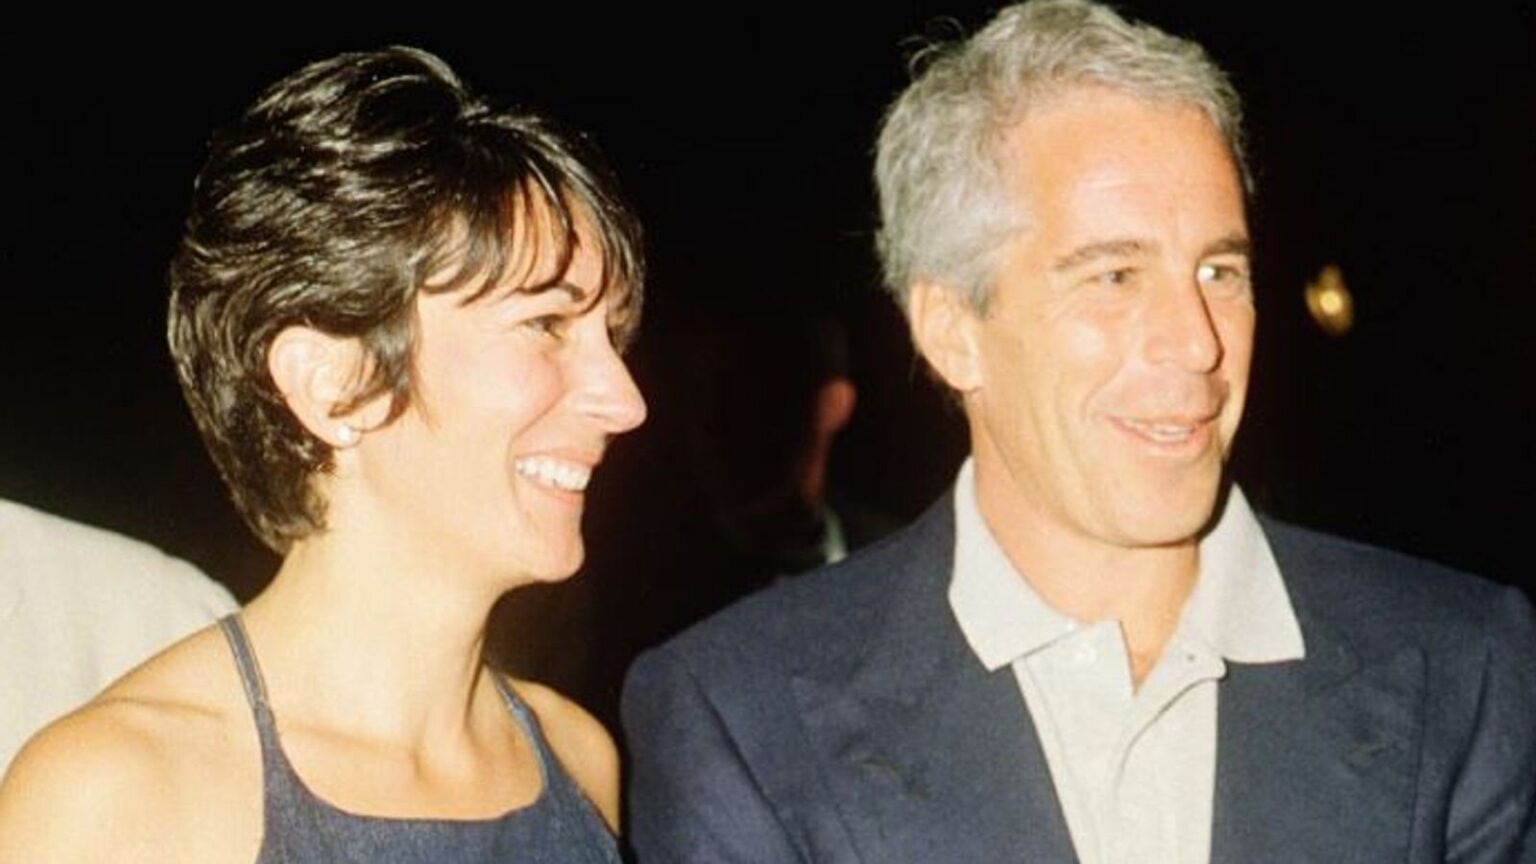 There are numerous stories out there about what Jeffrey Epstein and Ghislaine Maxwell have done. Here are some of the worst details.